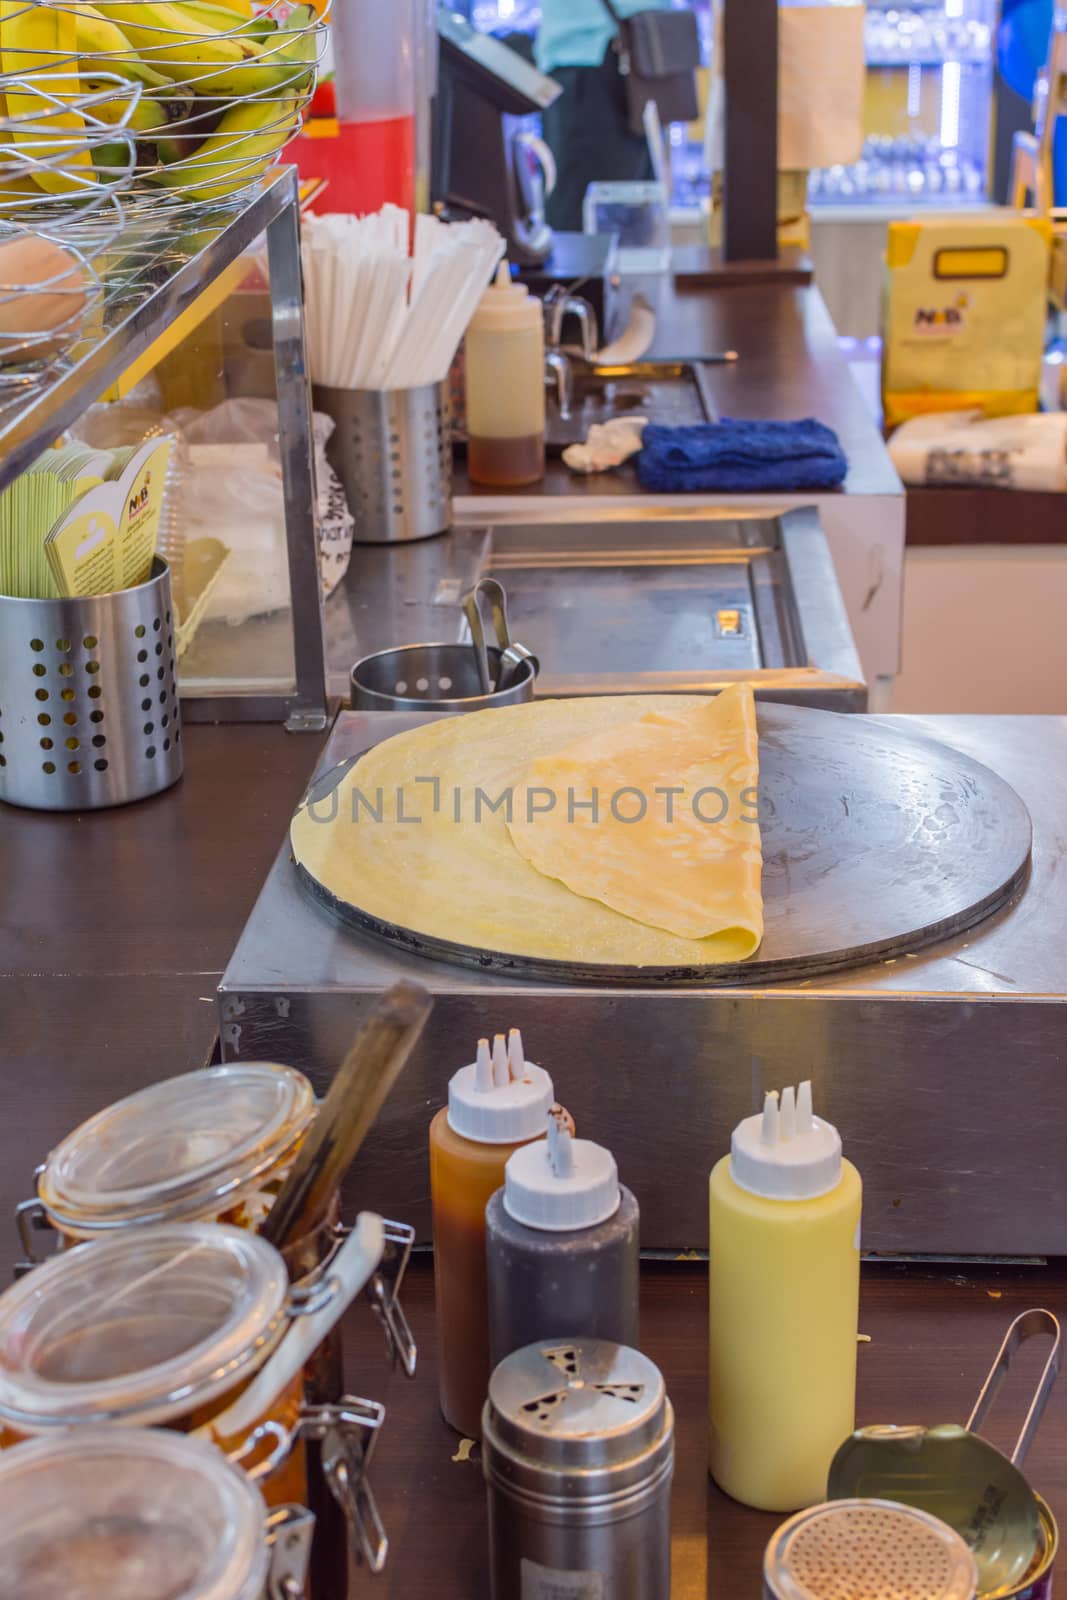 Bangkok, Thailand -  June 5, 2016 : Unidentified chef cooking a crepe is a sweet food for sale at Thai street dessert food market.